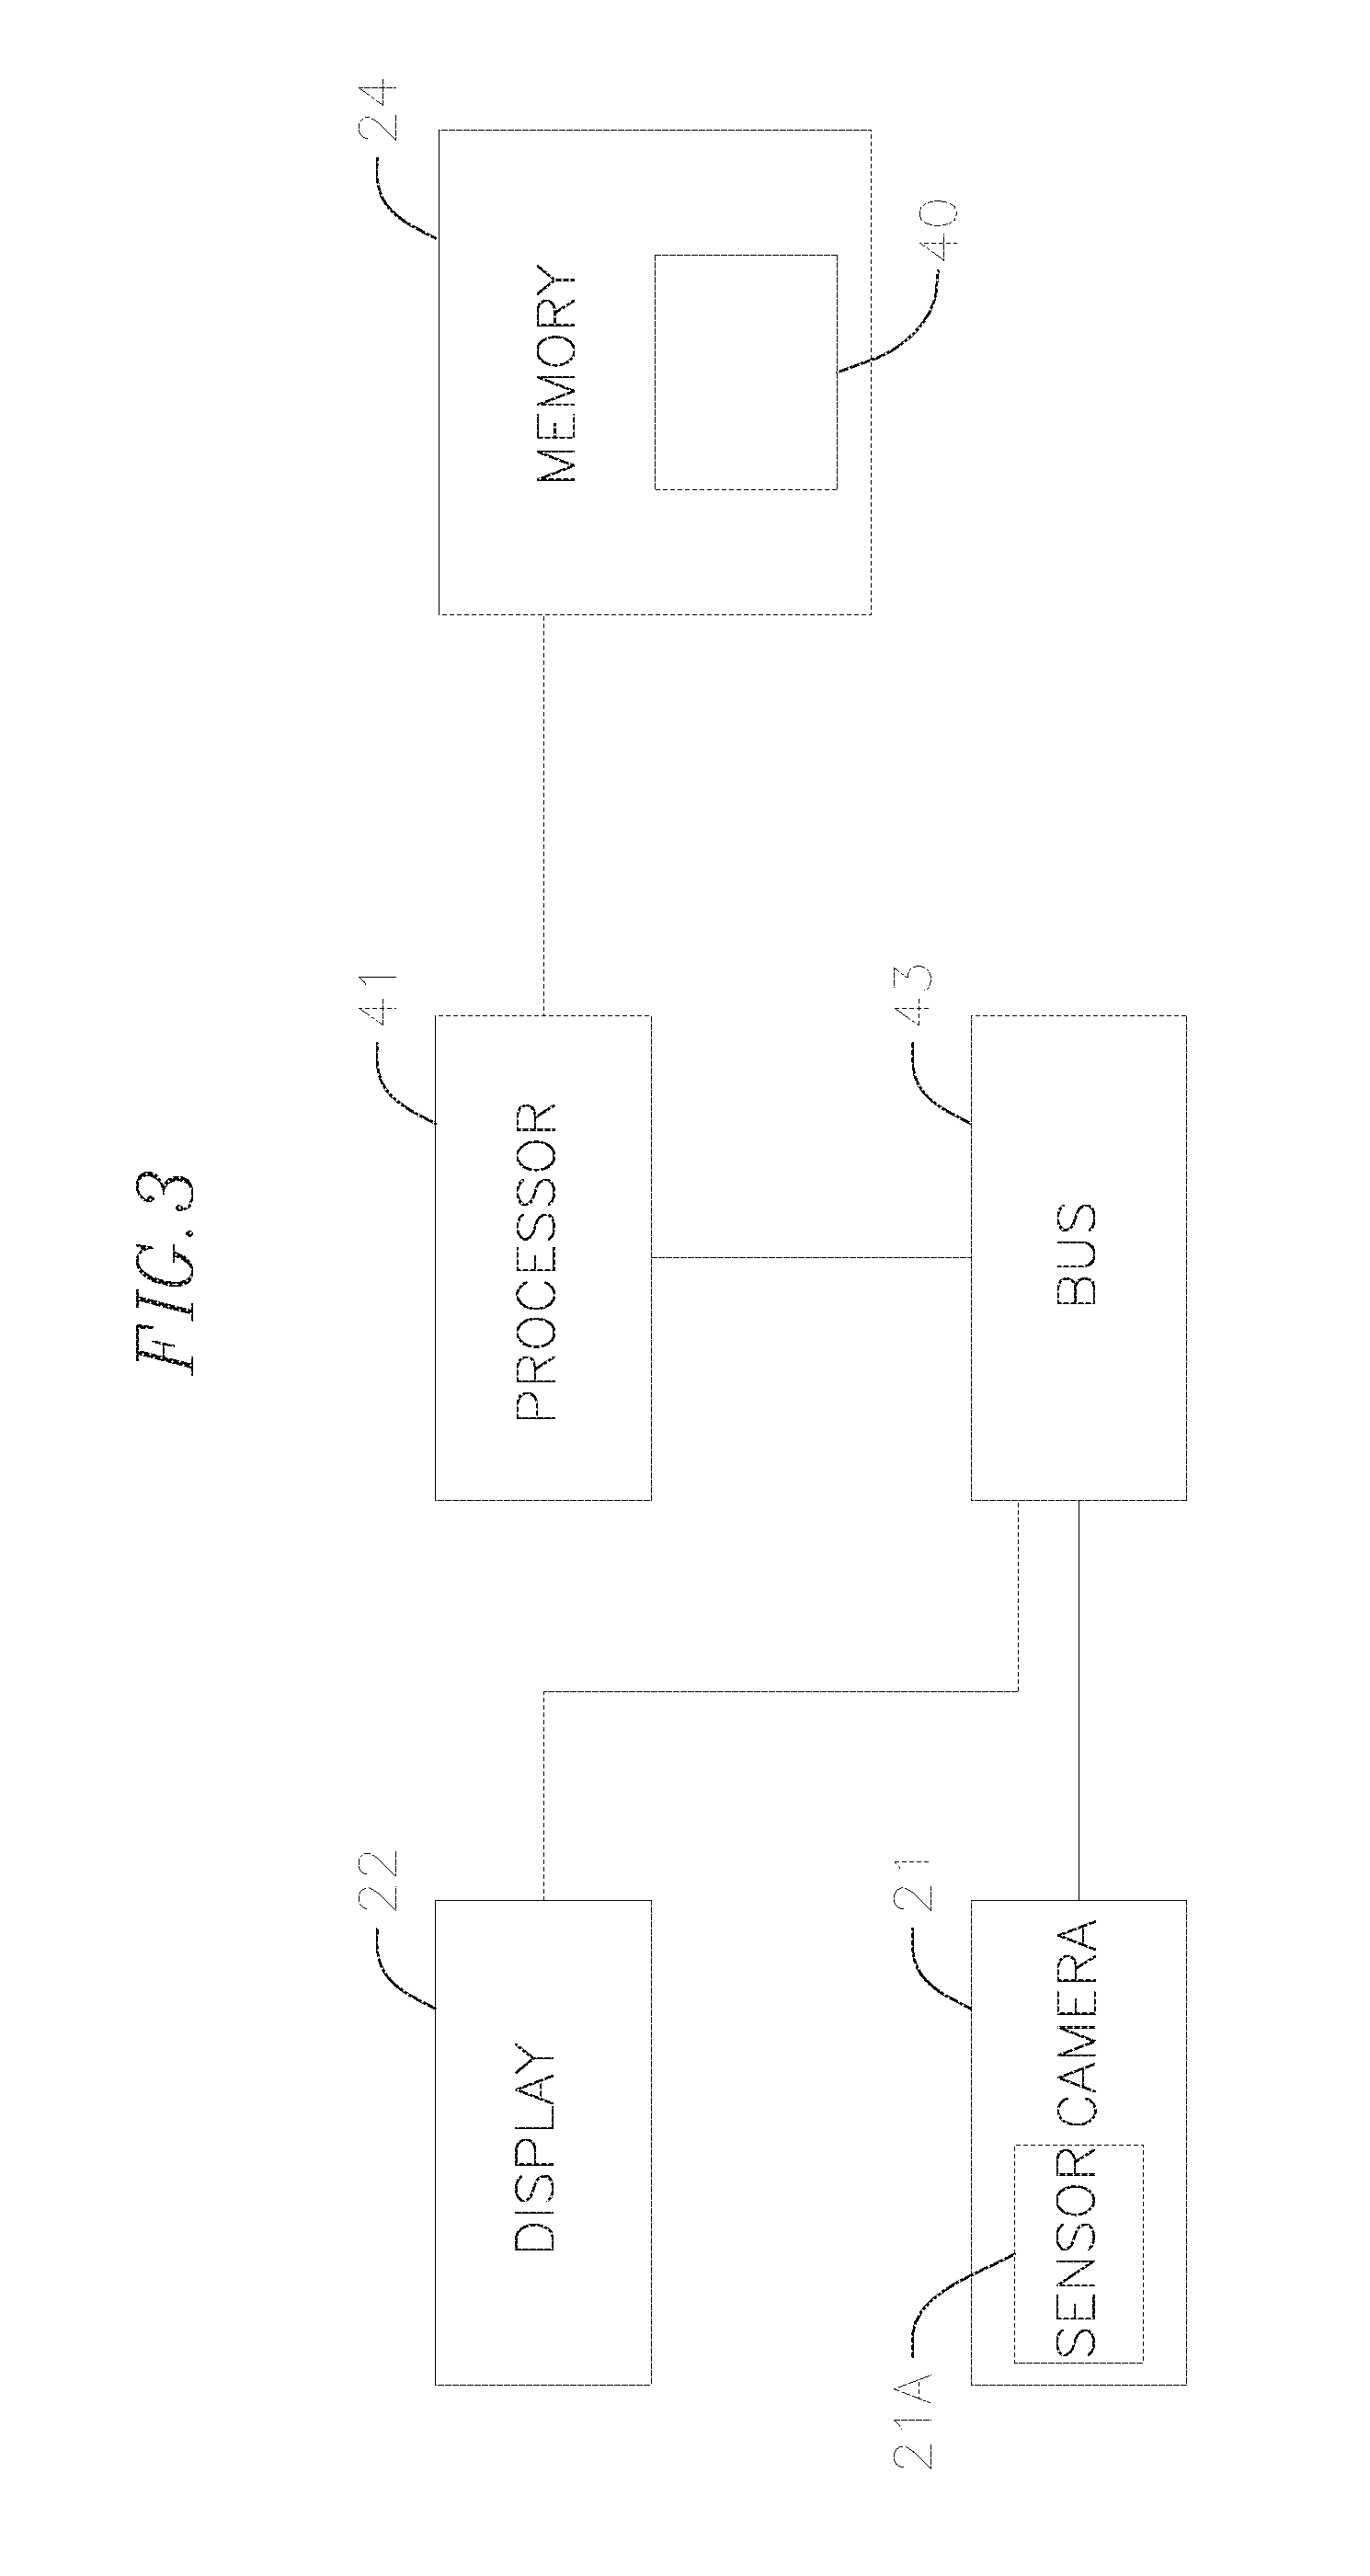 Camera system and method for aligning images and presenting a series of aligned images